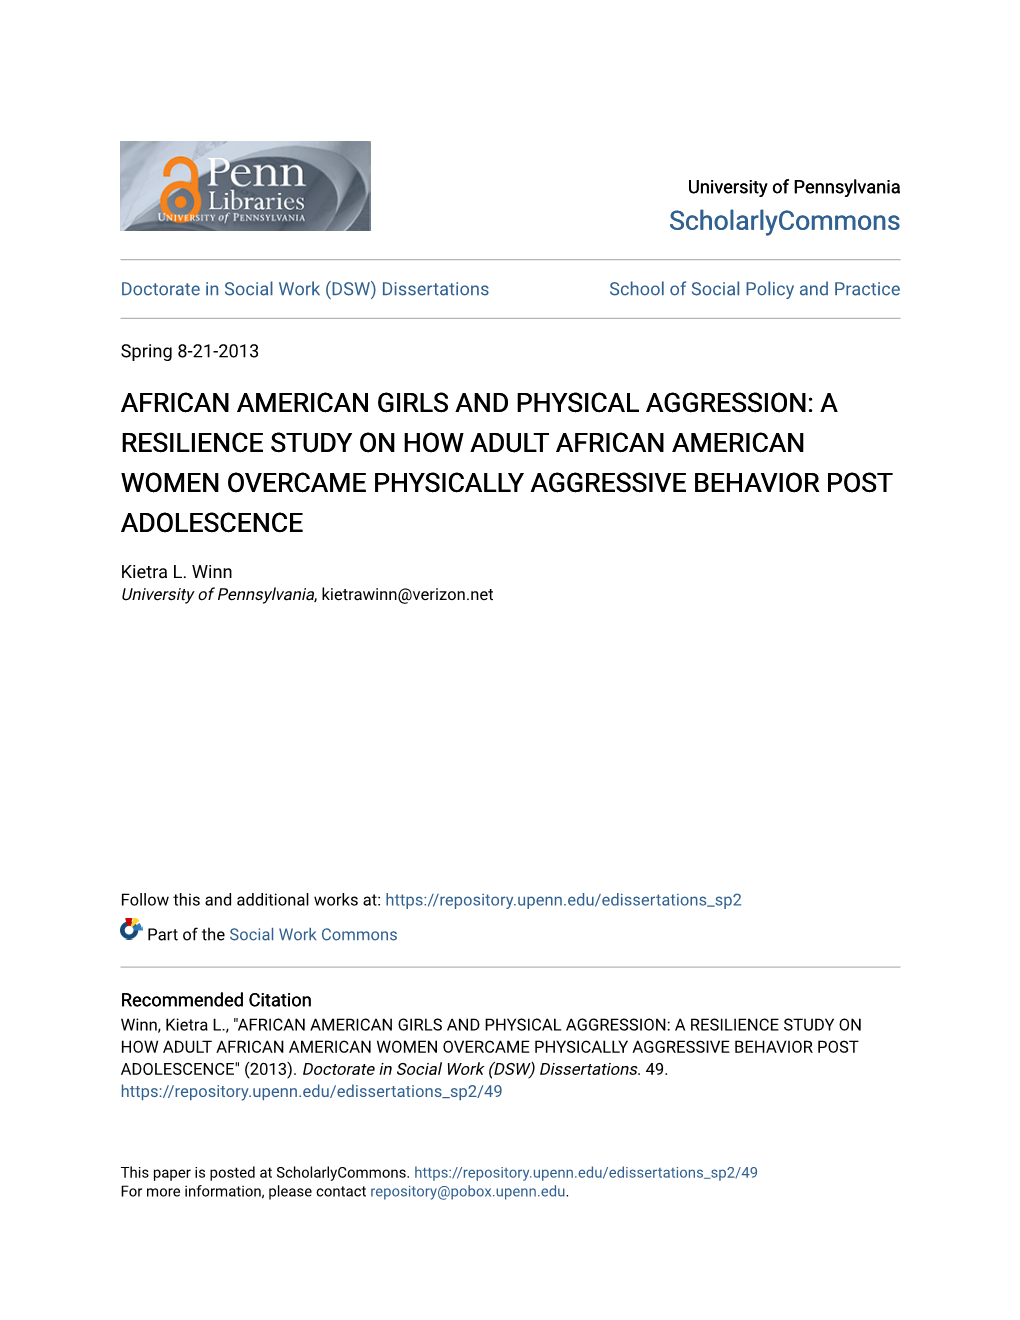 A Resilience Study on How Adult African American Women Overcame Physically Aggressive Behavior Post Adolescence